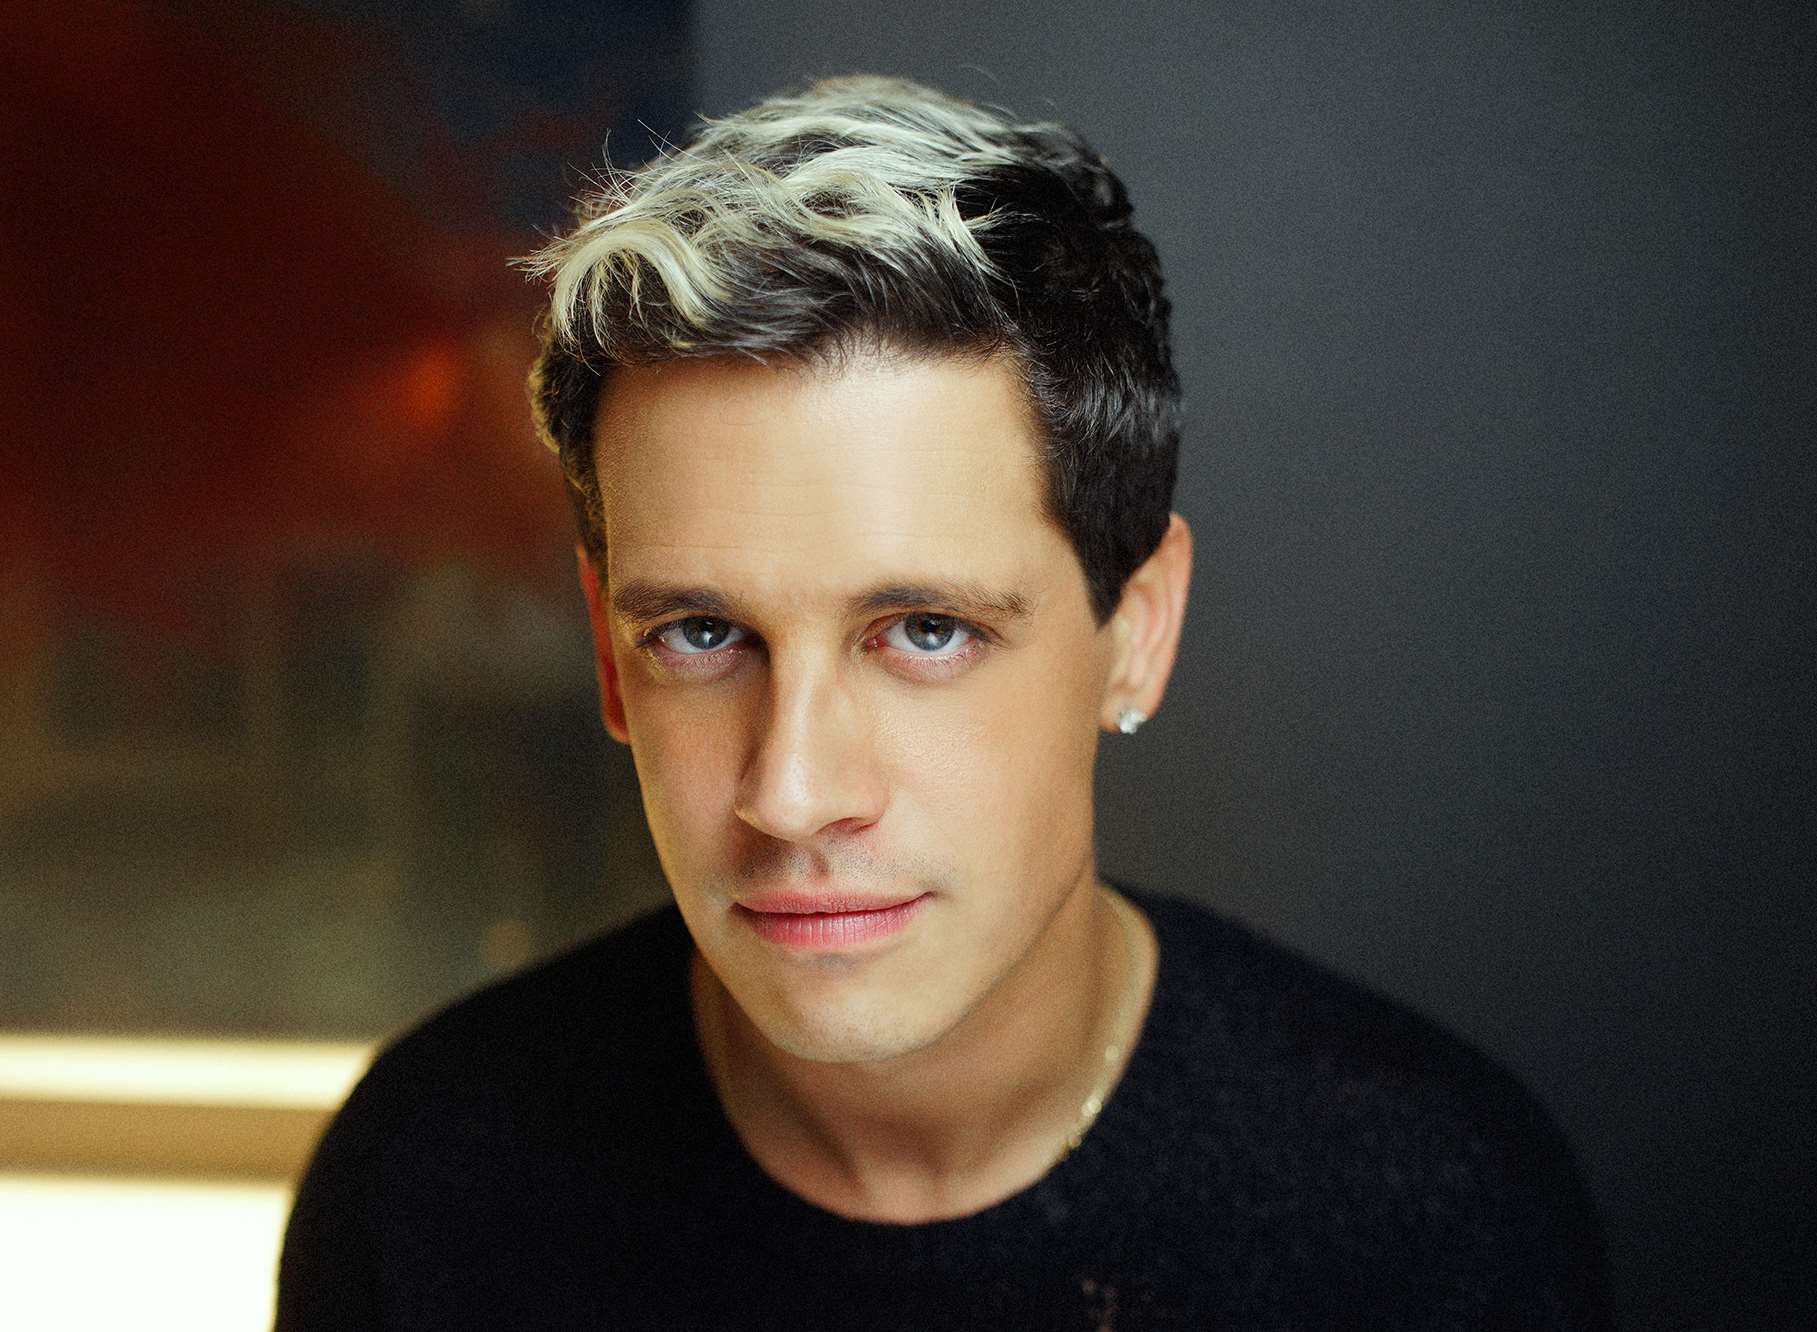 Publishers have ditched plans for a book by Milo Yiannopoulos. Picture: Mike Allen